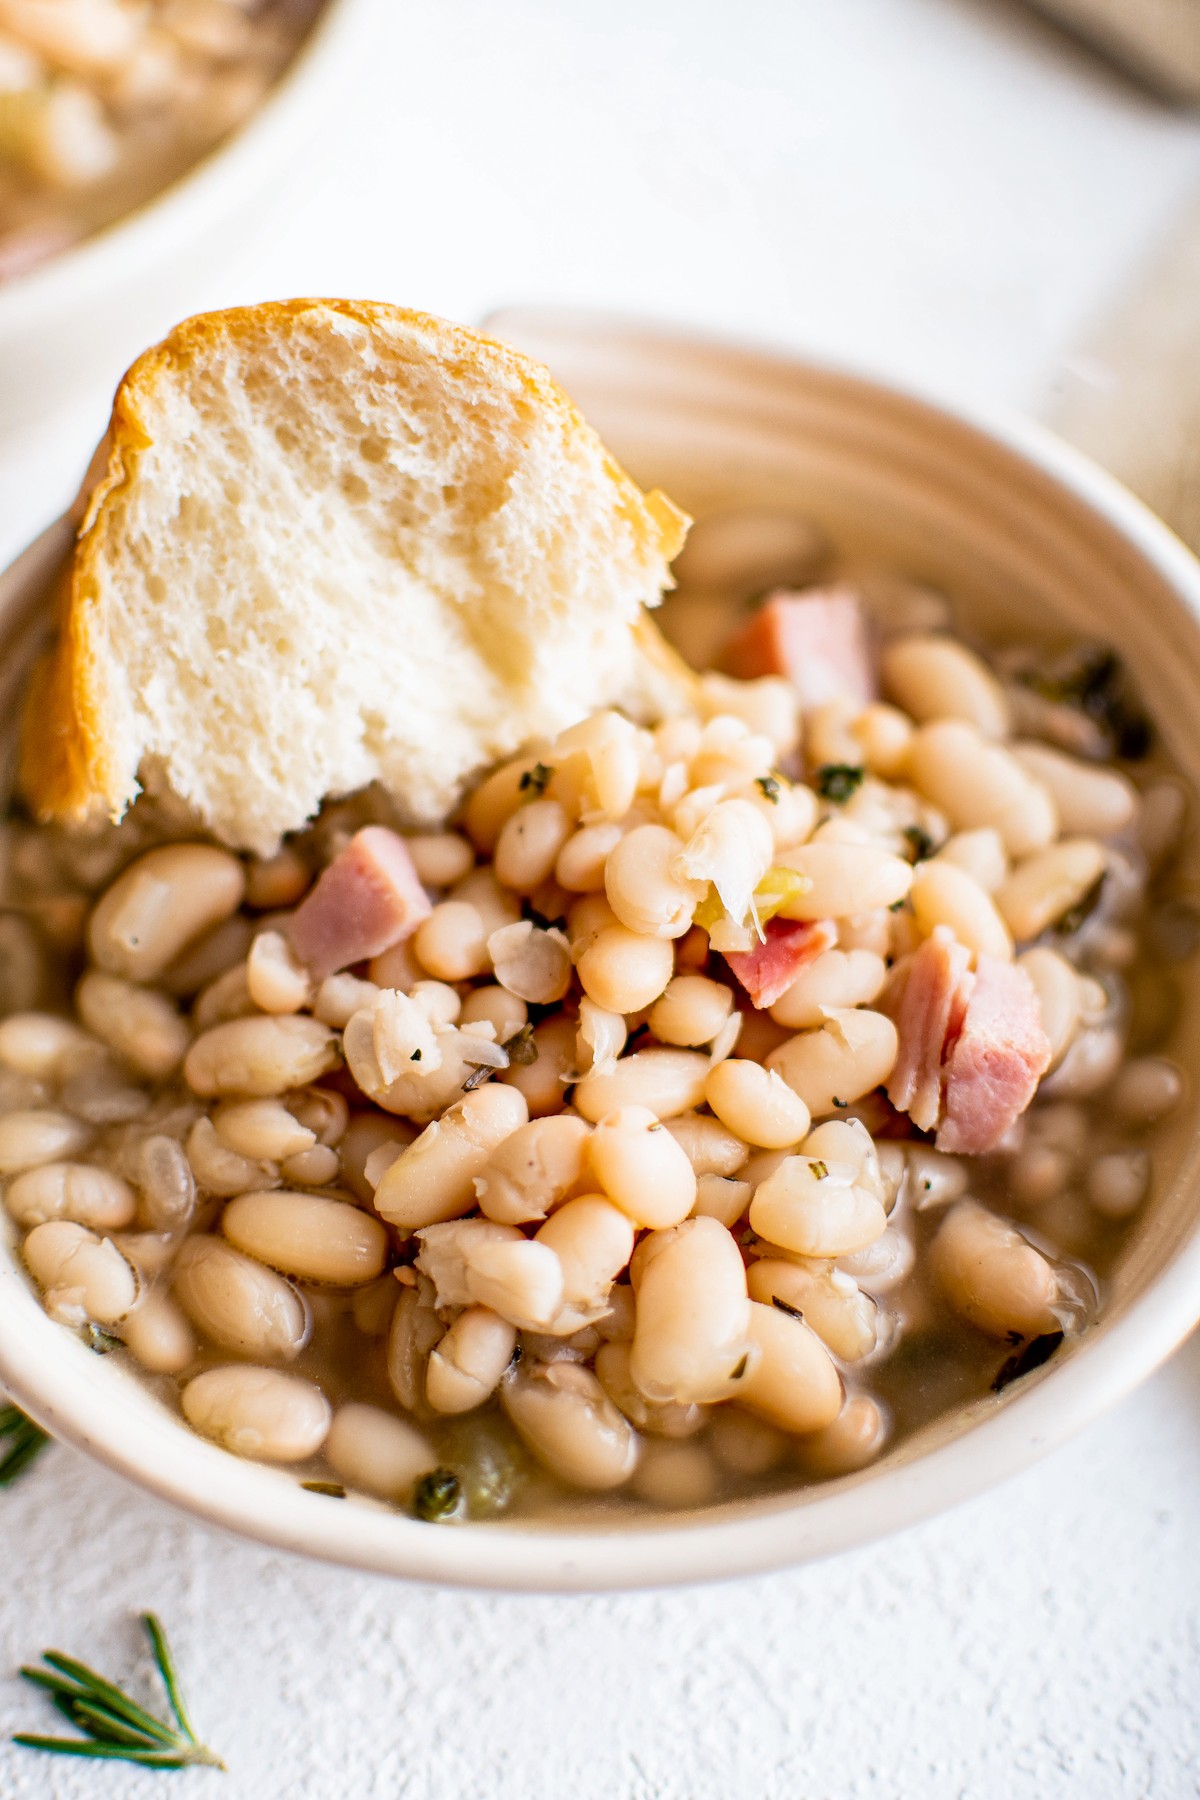 Bean soup with a hunk of bread in it.